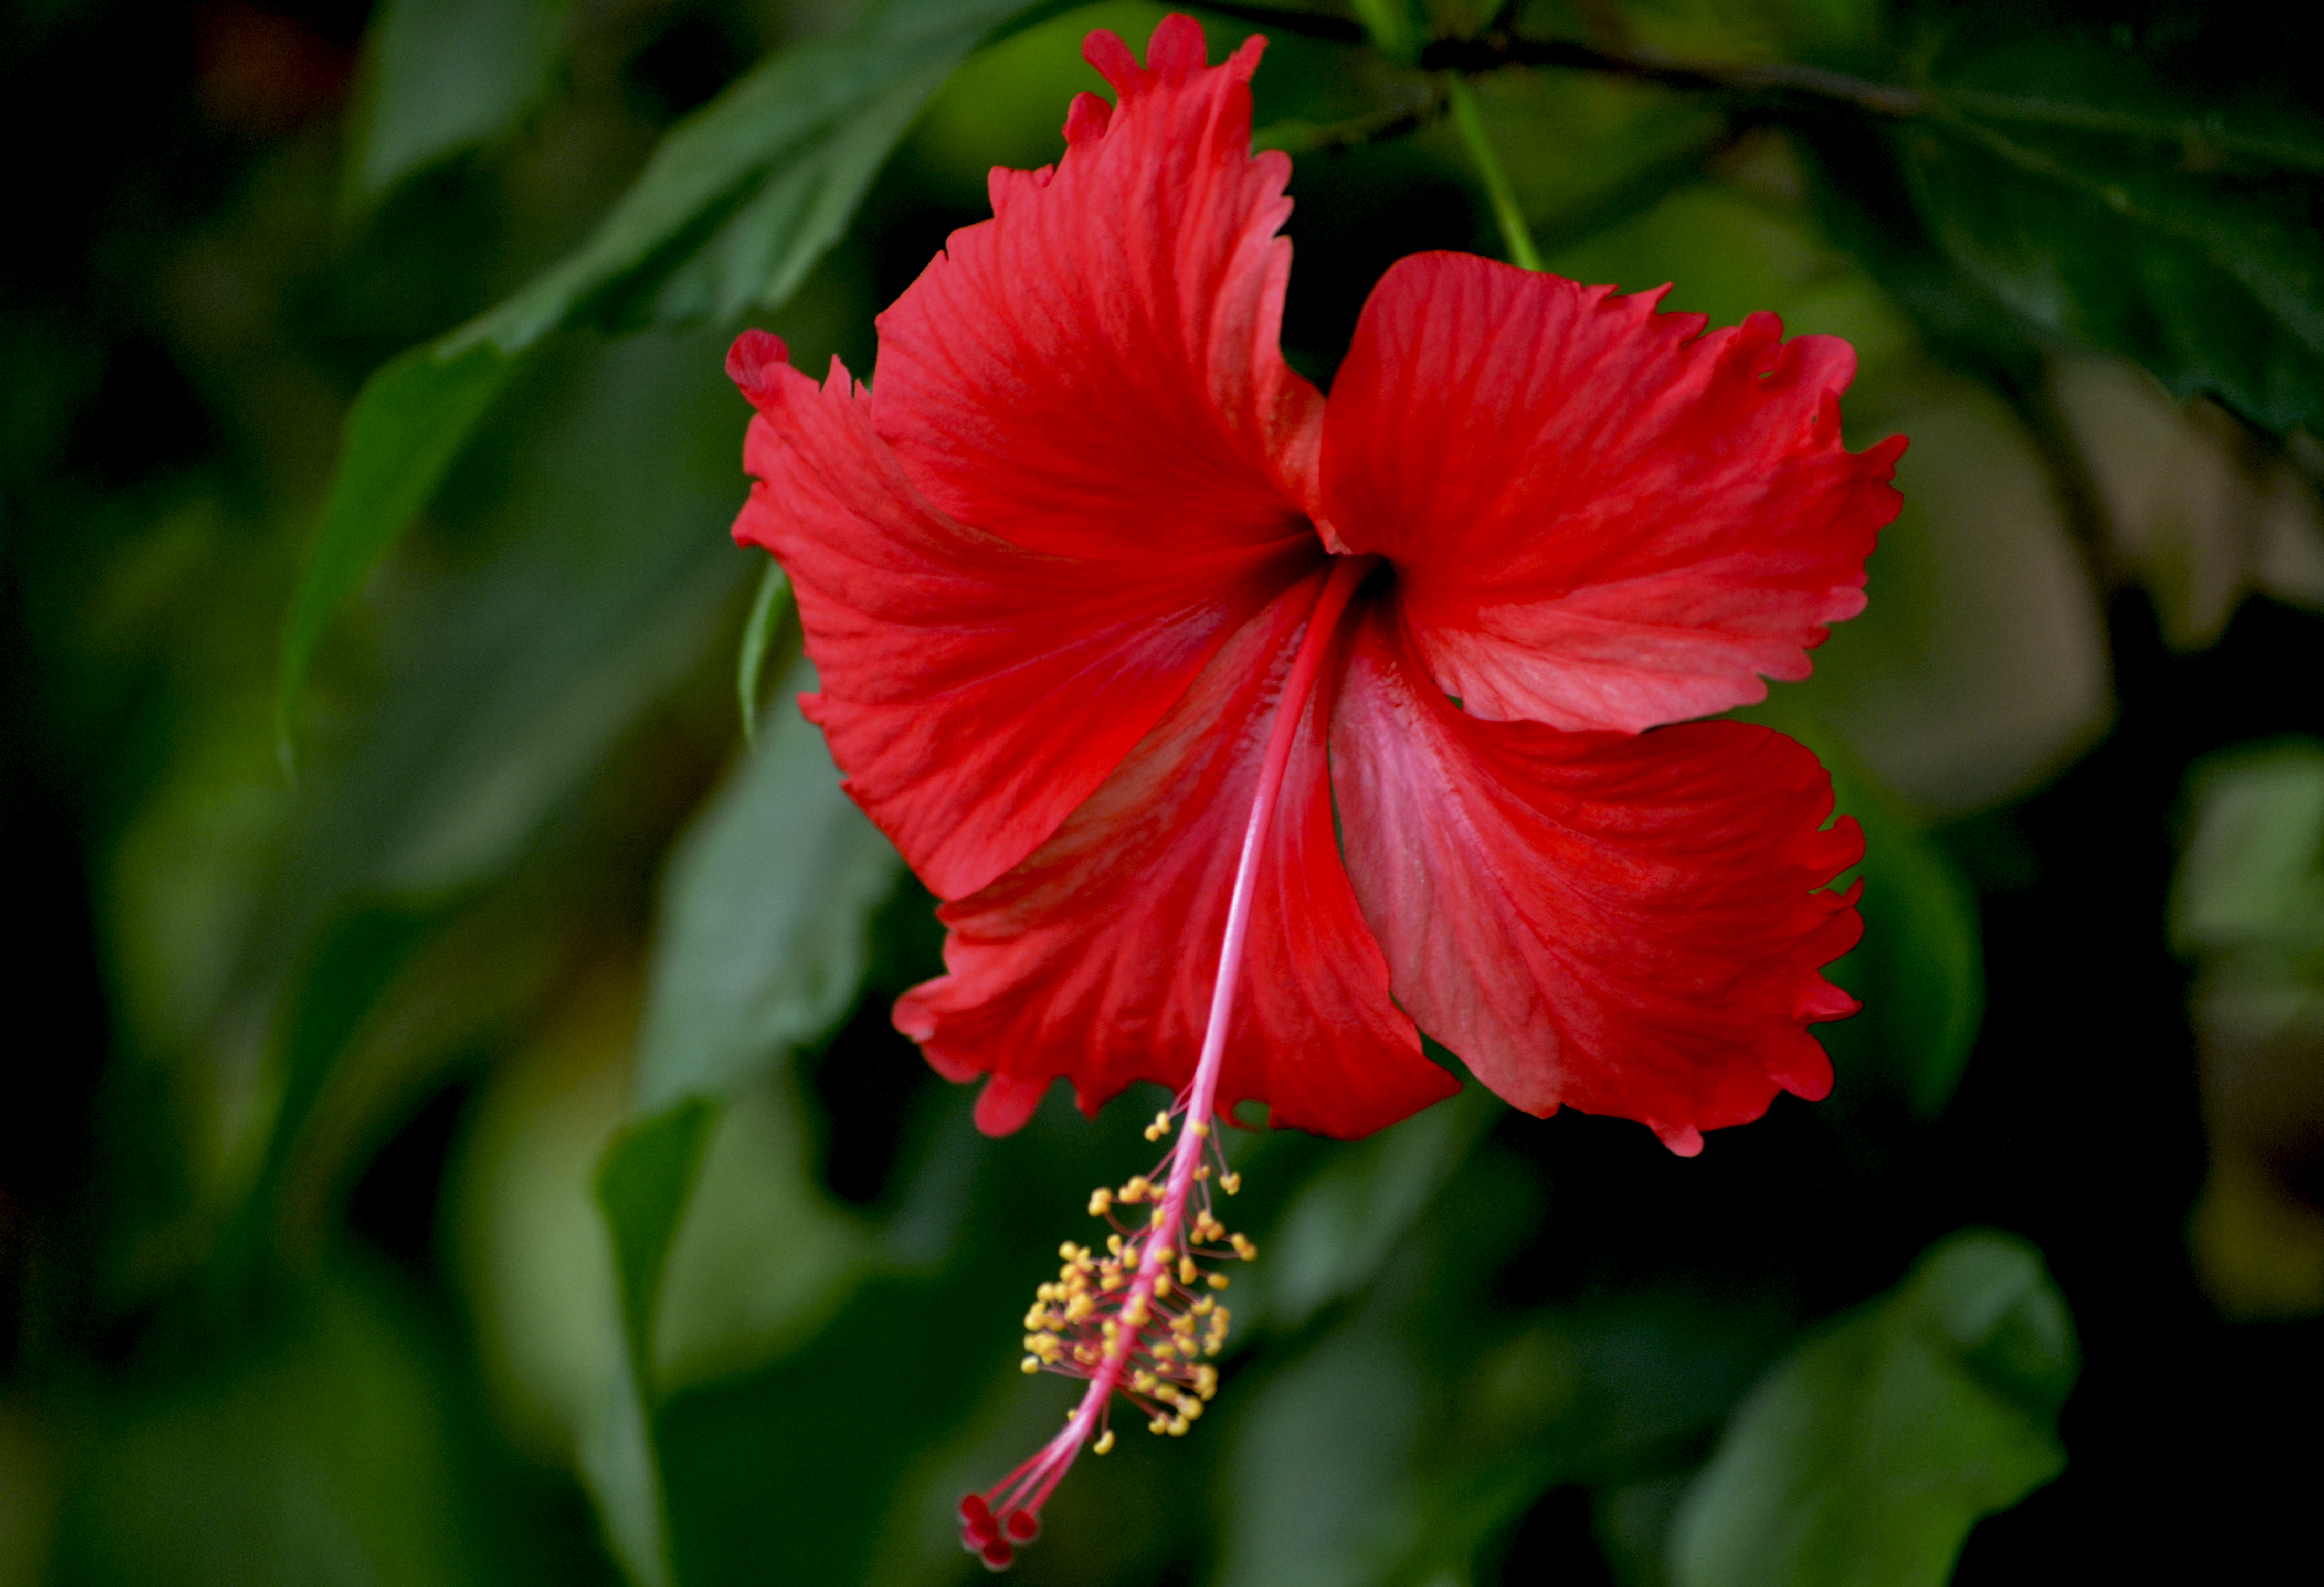 File:Red Hibiscus from Kerala.jpg - Wikimedia Commons